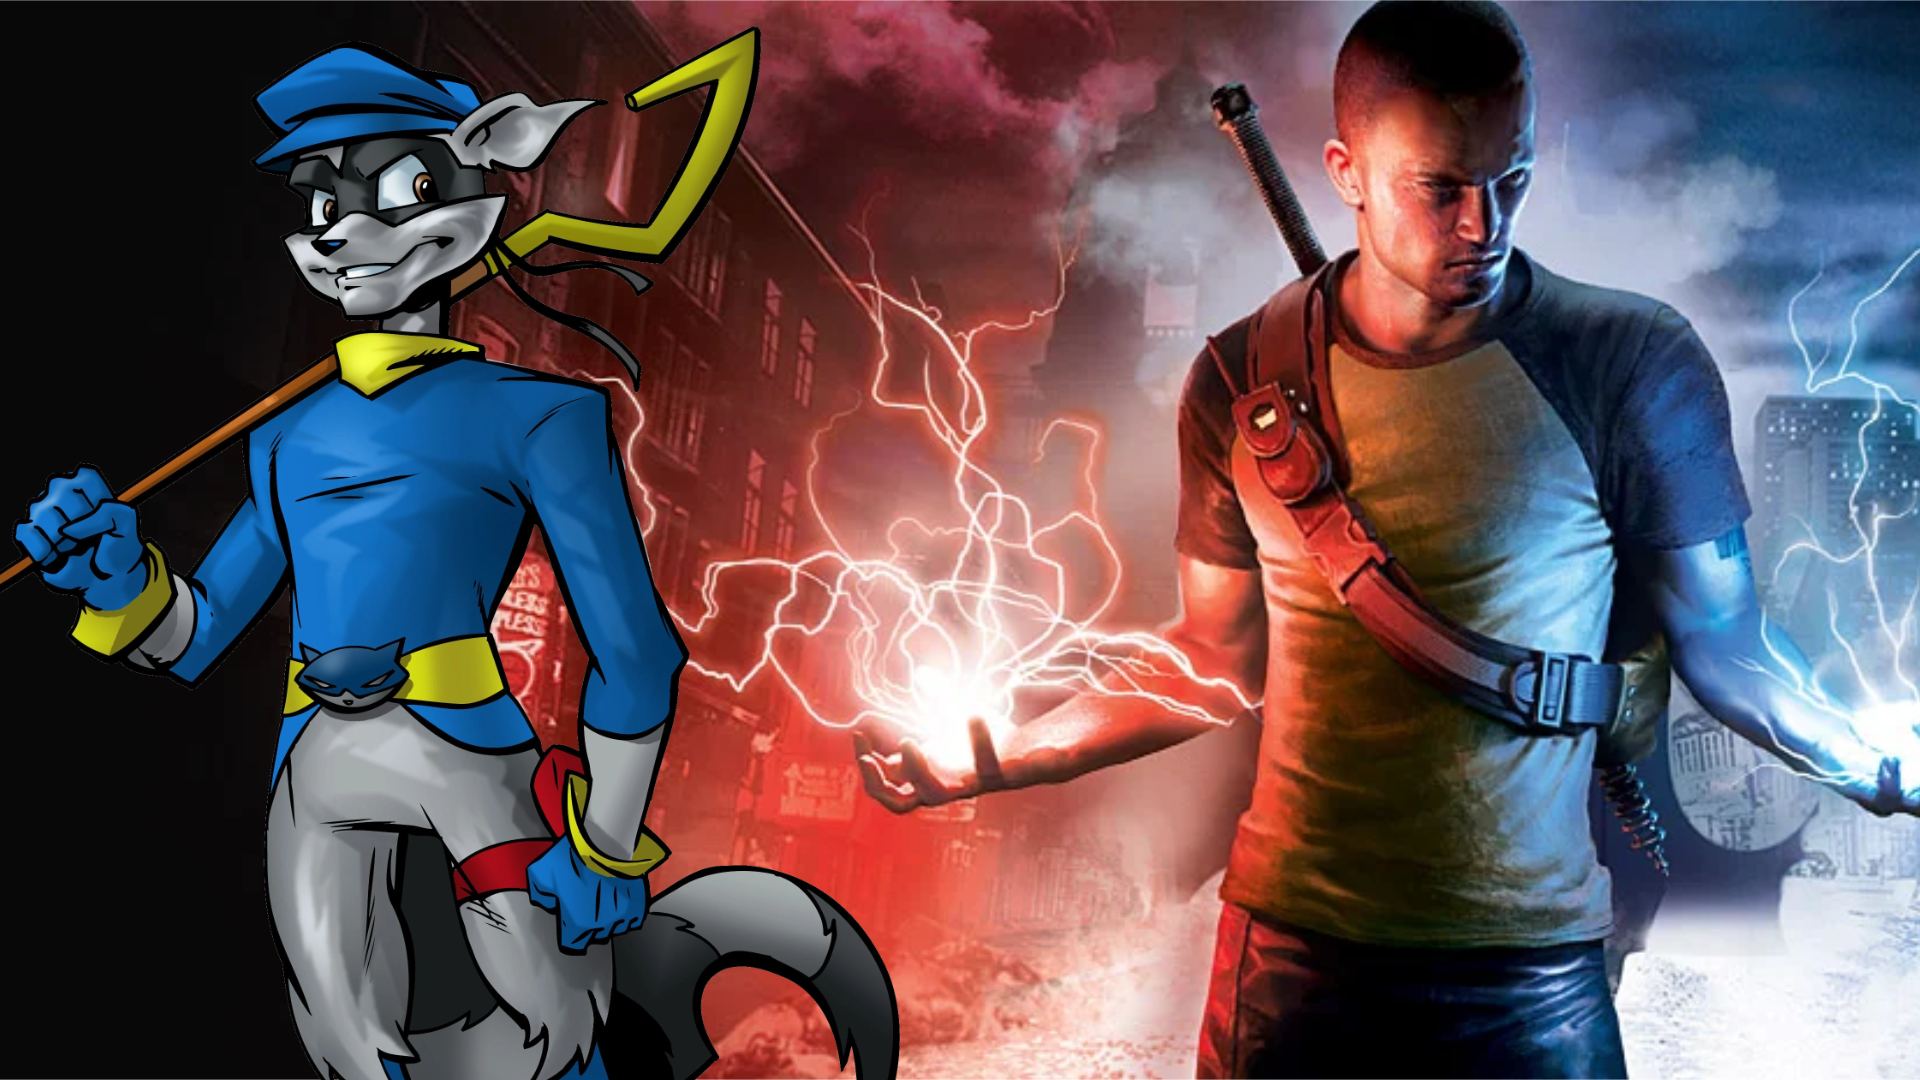 New Sly Cooper Game Announcement Rumored for Late 2022